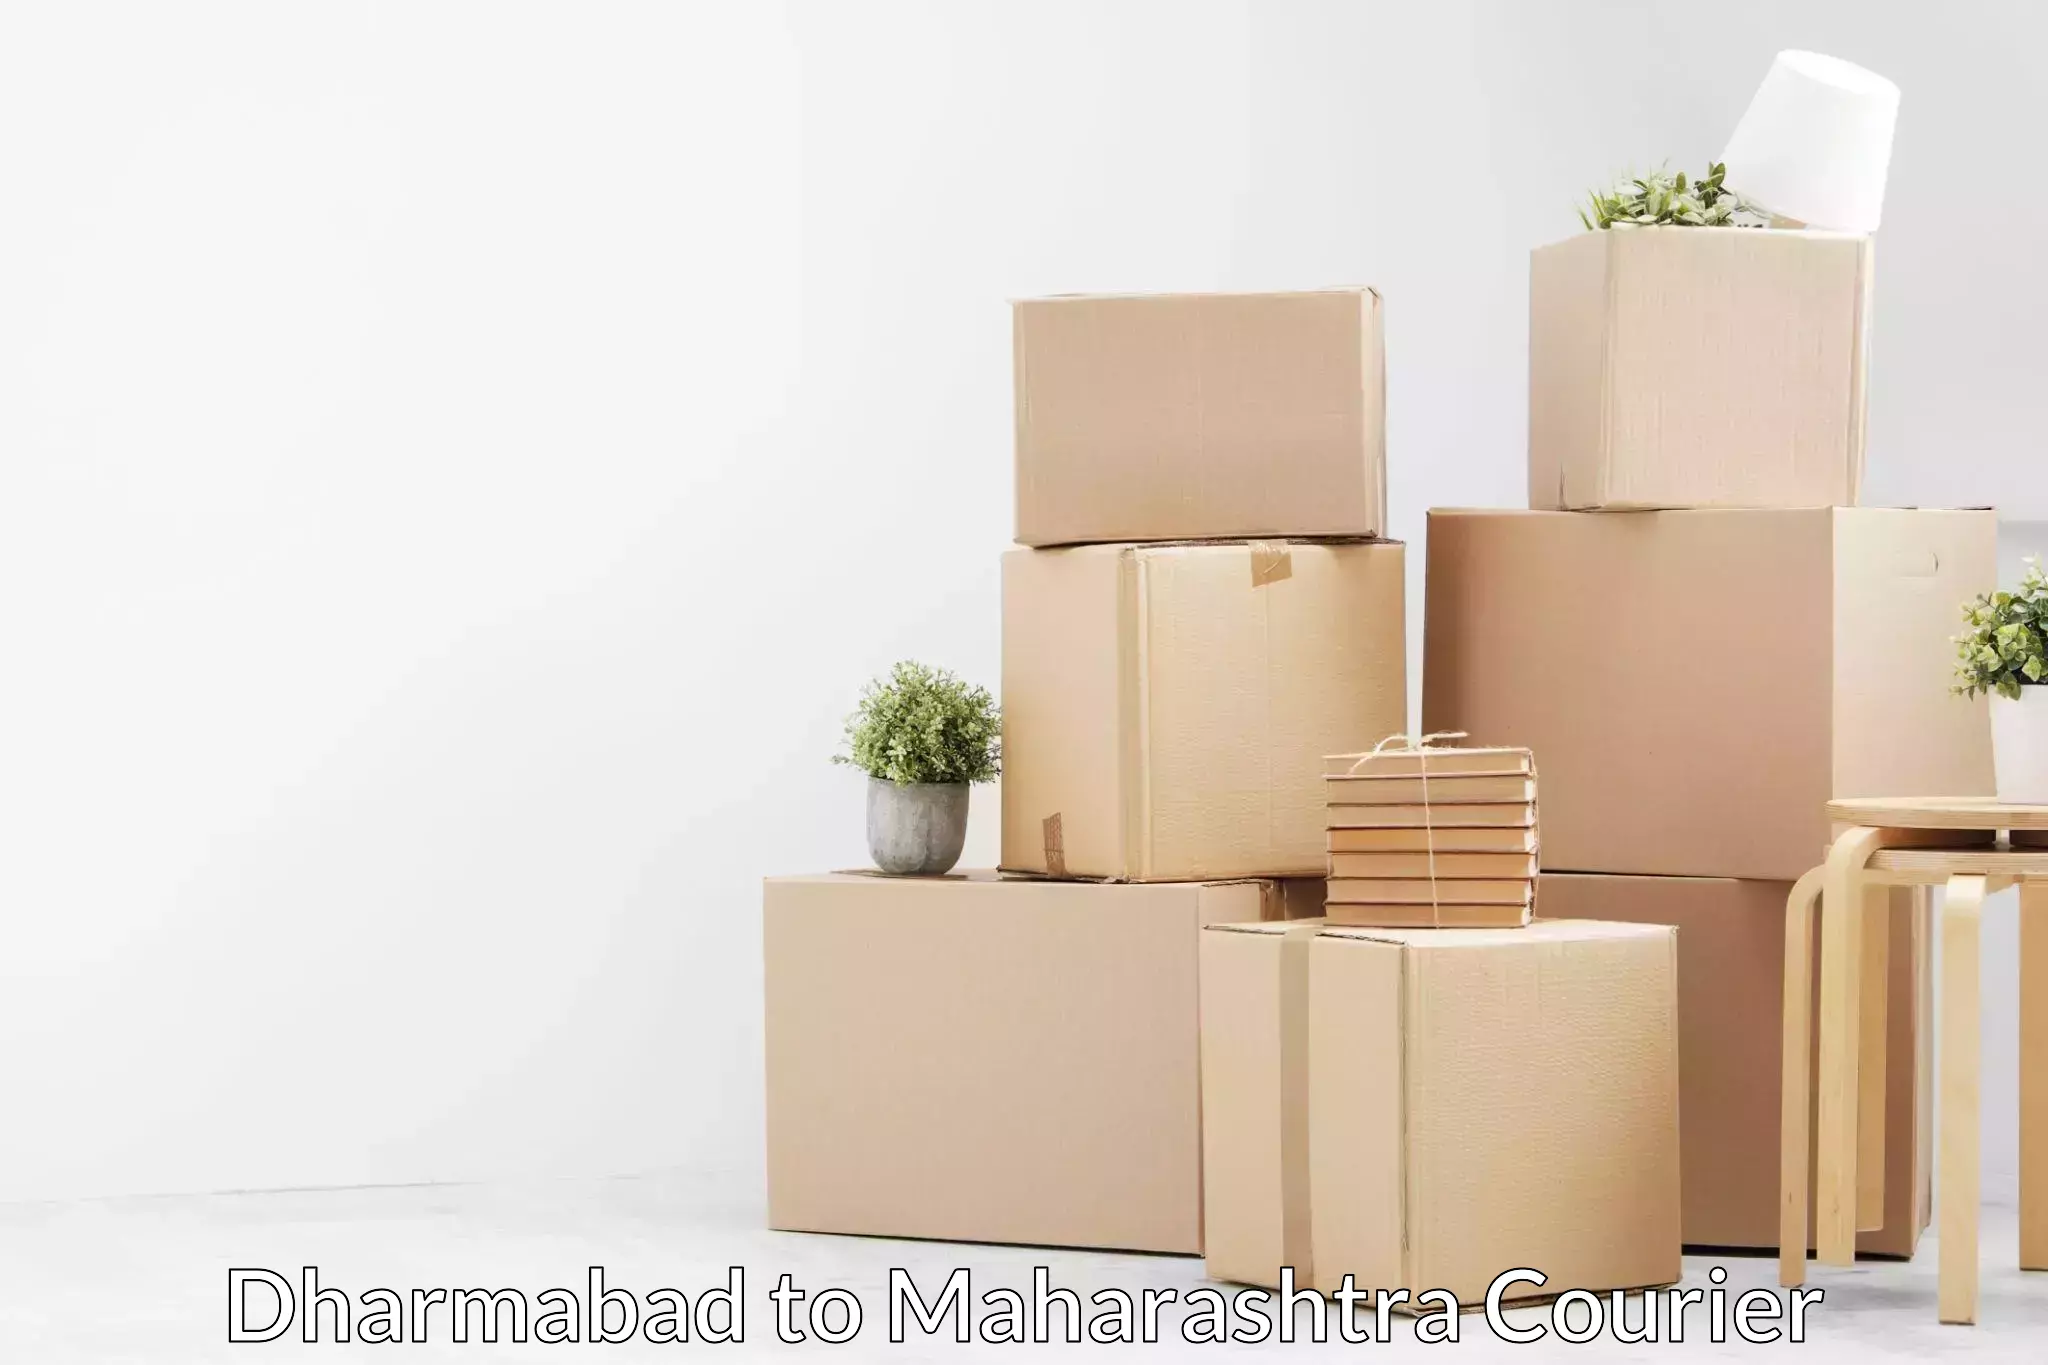 Professional moving assistance in Dharmabad to Atpadi